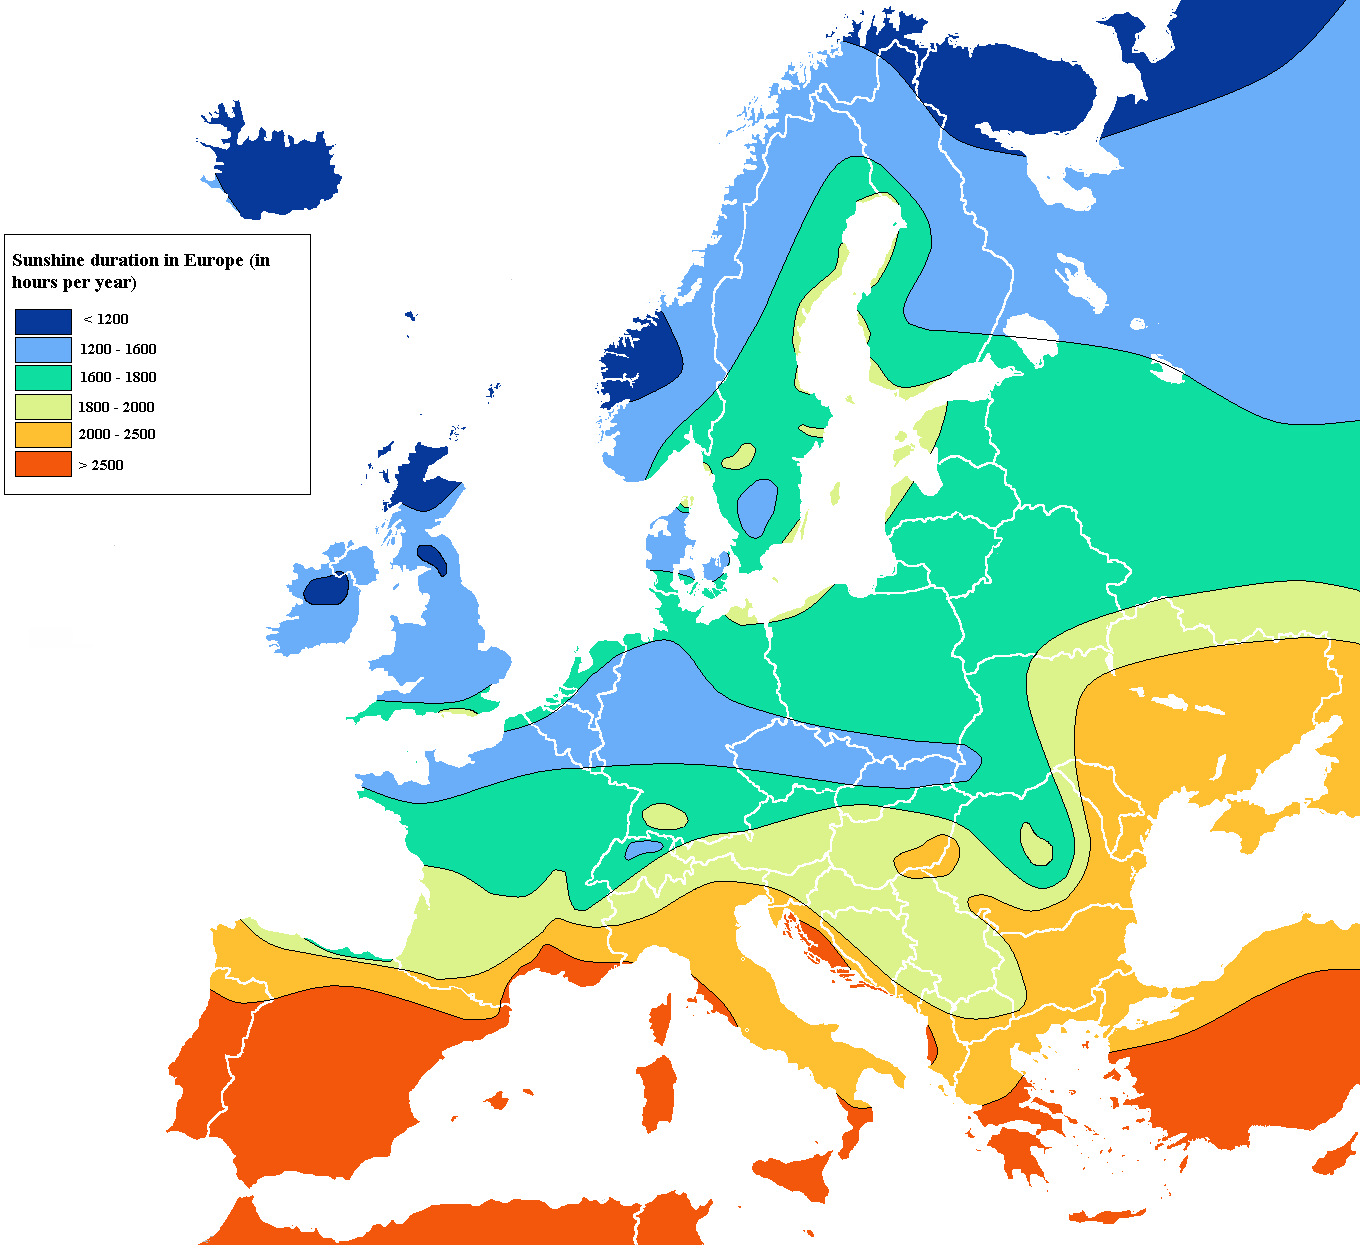 Europe_sunshine_hours_map.png